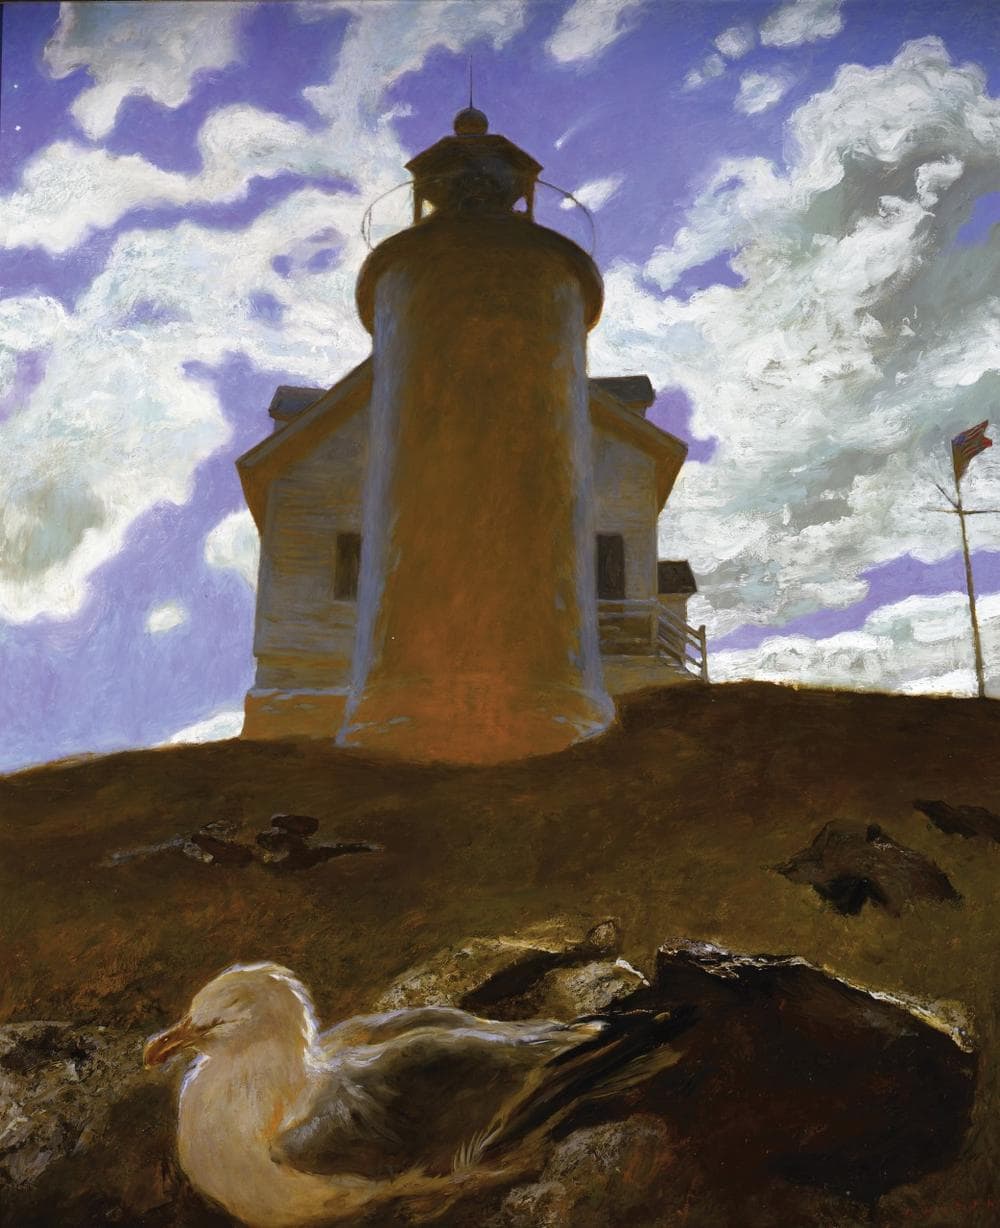 Jamie Wyeth, Comet, 1997, Oil on canvas, 48 x 40 inches.  Private Collector, New Hope, Pennsylvania, ©Jamie Wyeth